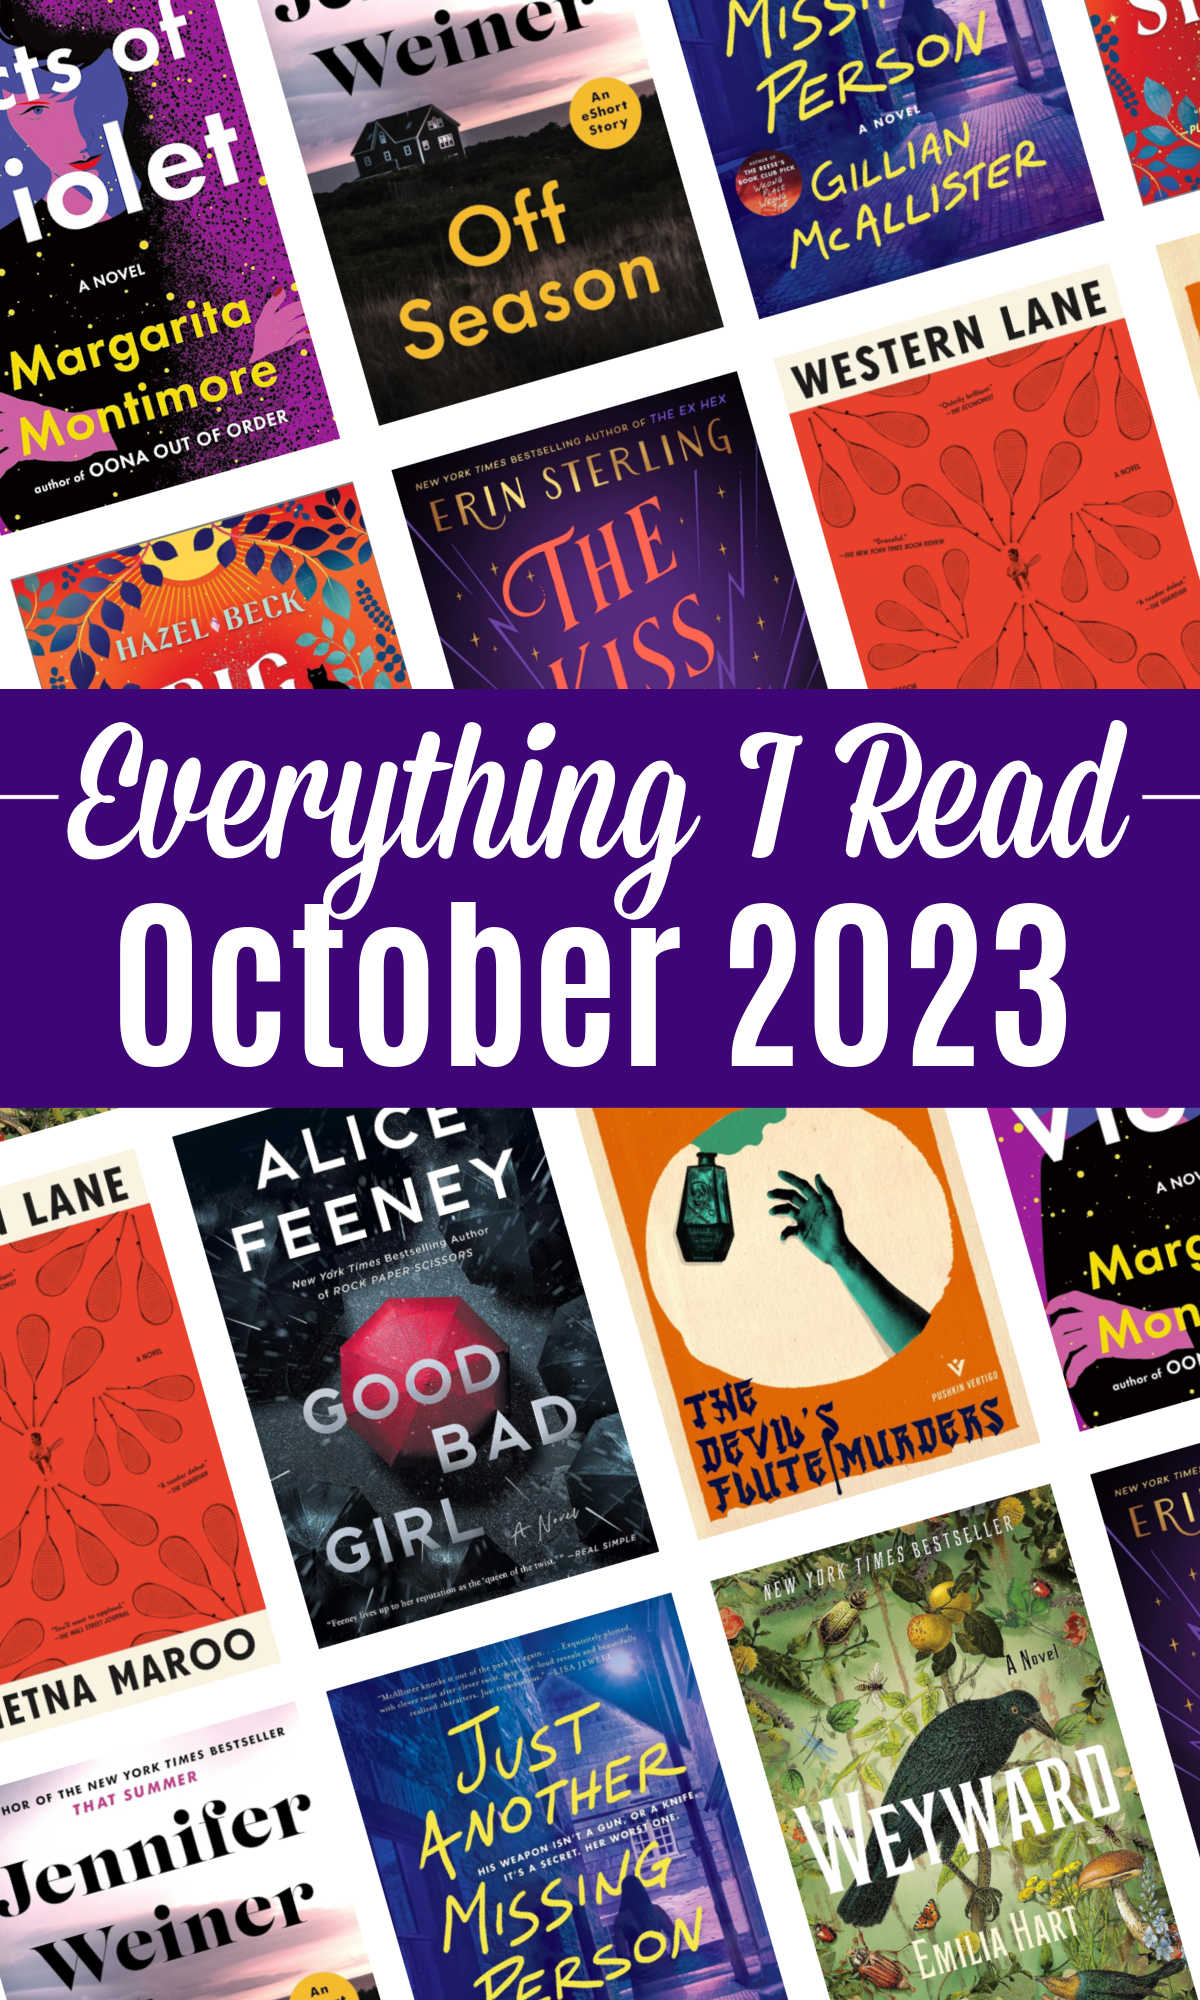 A photo collage of covers from everything I read in October 2023.